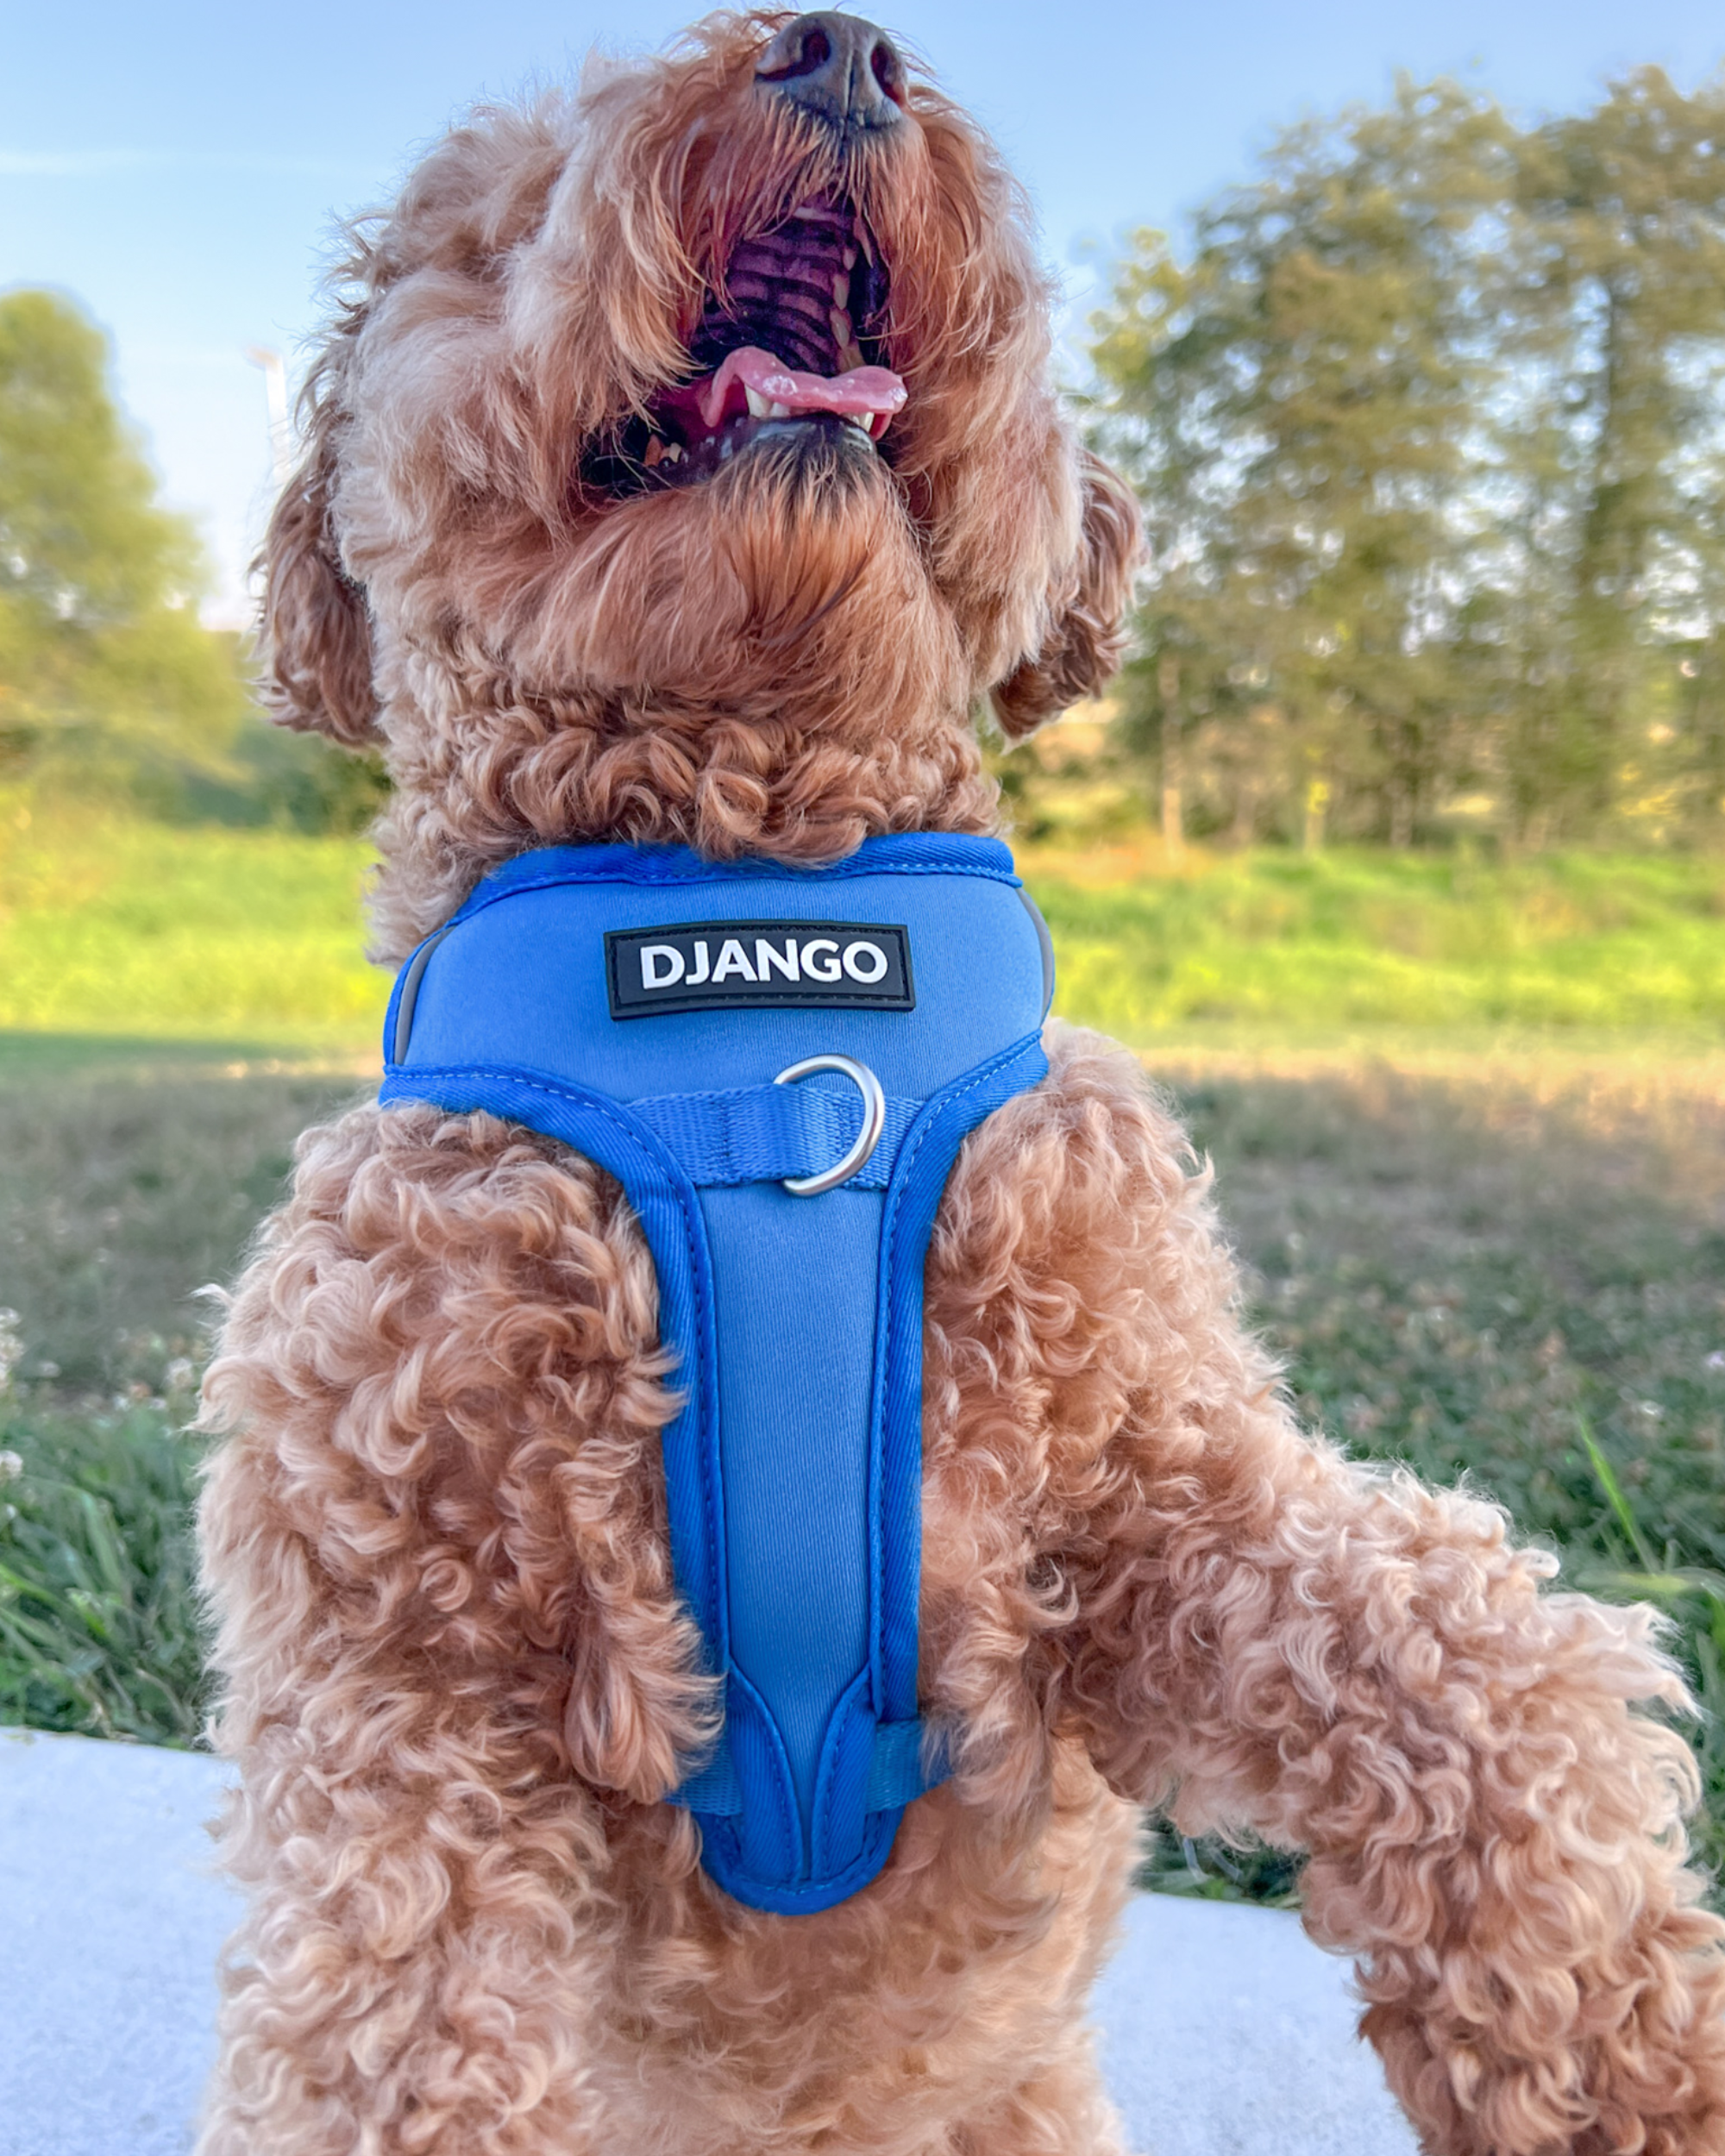 DJANGO Tahoe No Pull Dog Harness in Alpine Blue - Key features include a weather-resistant and padded neoprene exterior, a narrow and deep harness body (to prevent the risk of chafing) reflective piping, and soft webbing. Maisey is a miniature poodle and bichon mix and wears size small in all DJANGO dog harnesses. - djangobrand.com